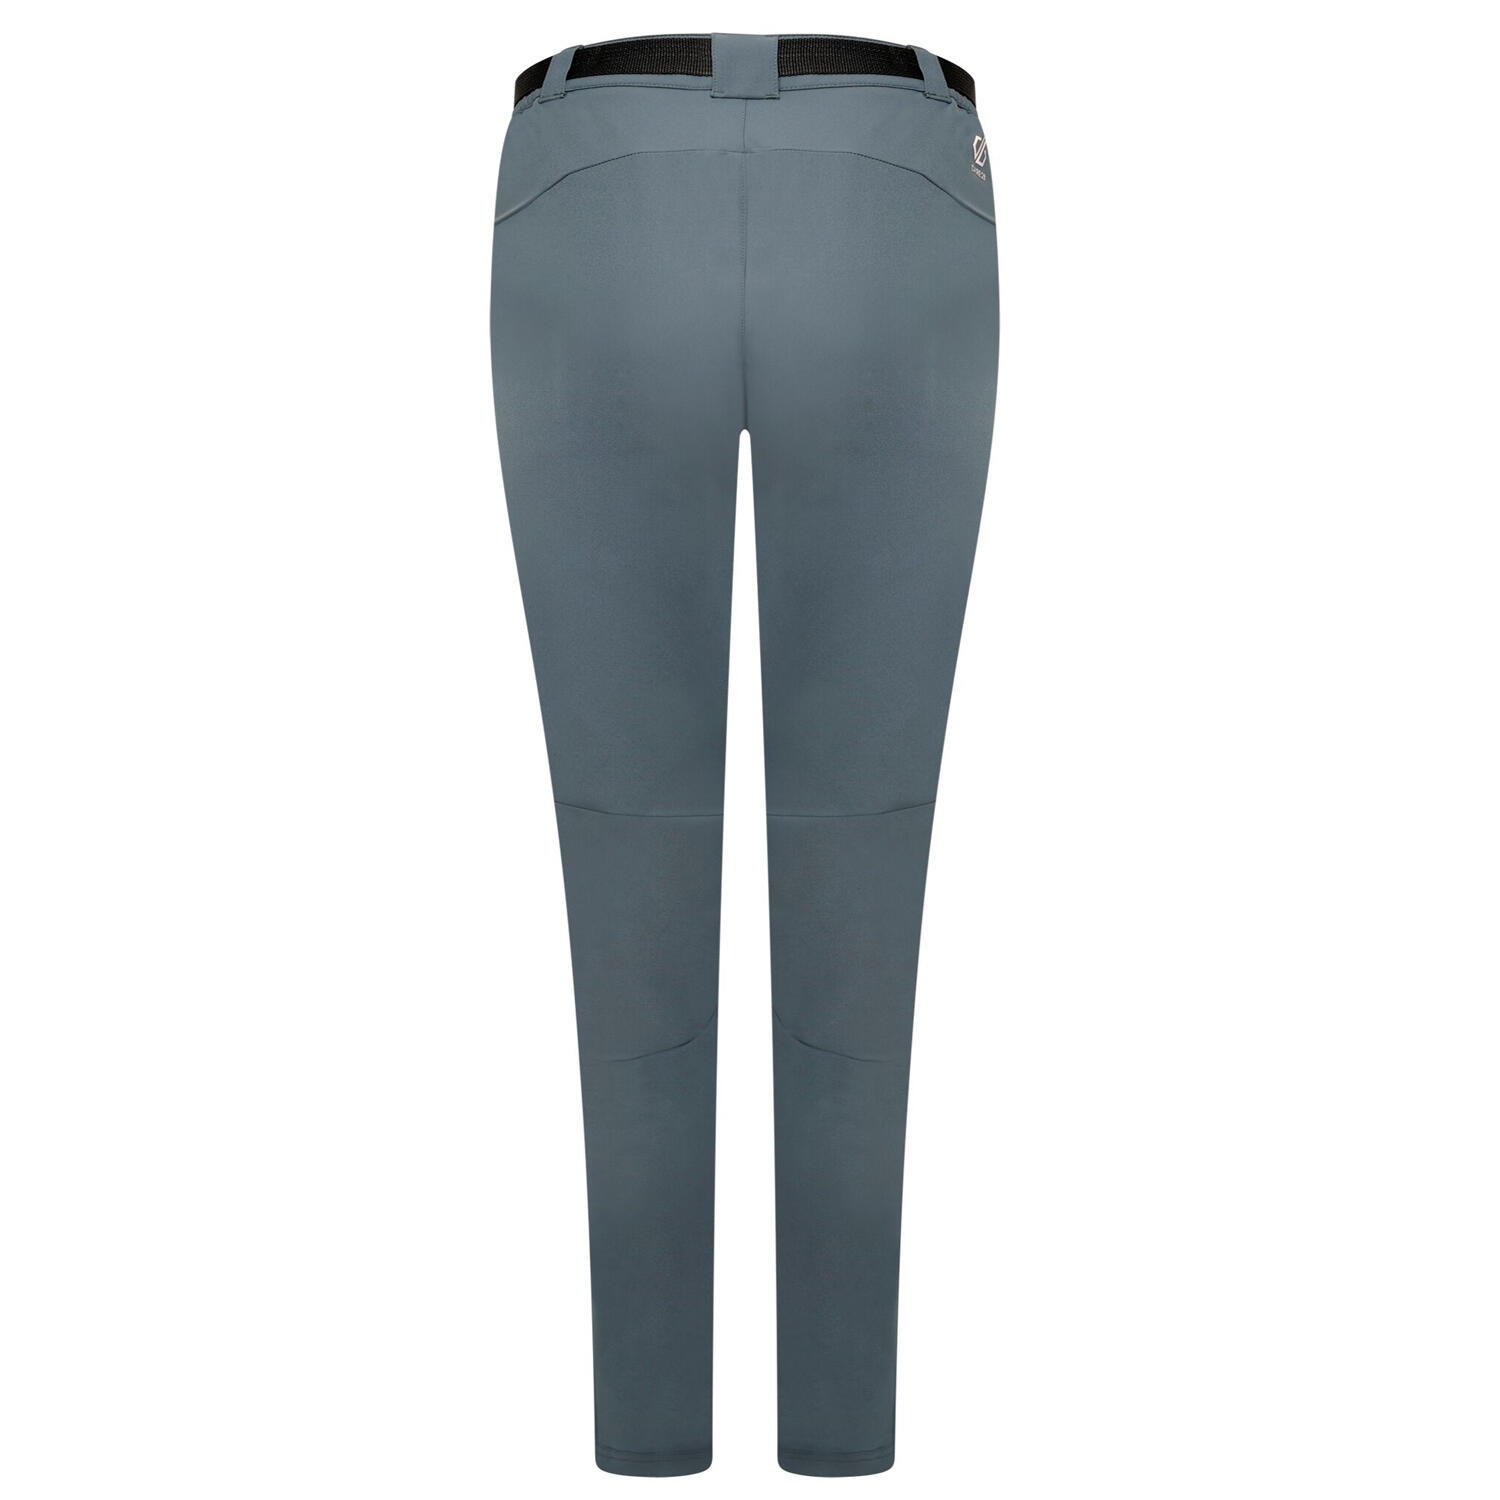 Womens/Ladies Melodic Pro Stretch Hiking Trousers (Orion Grey) 2/4